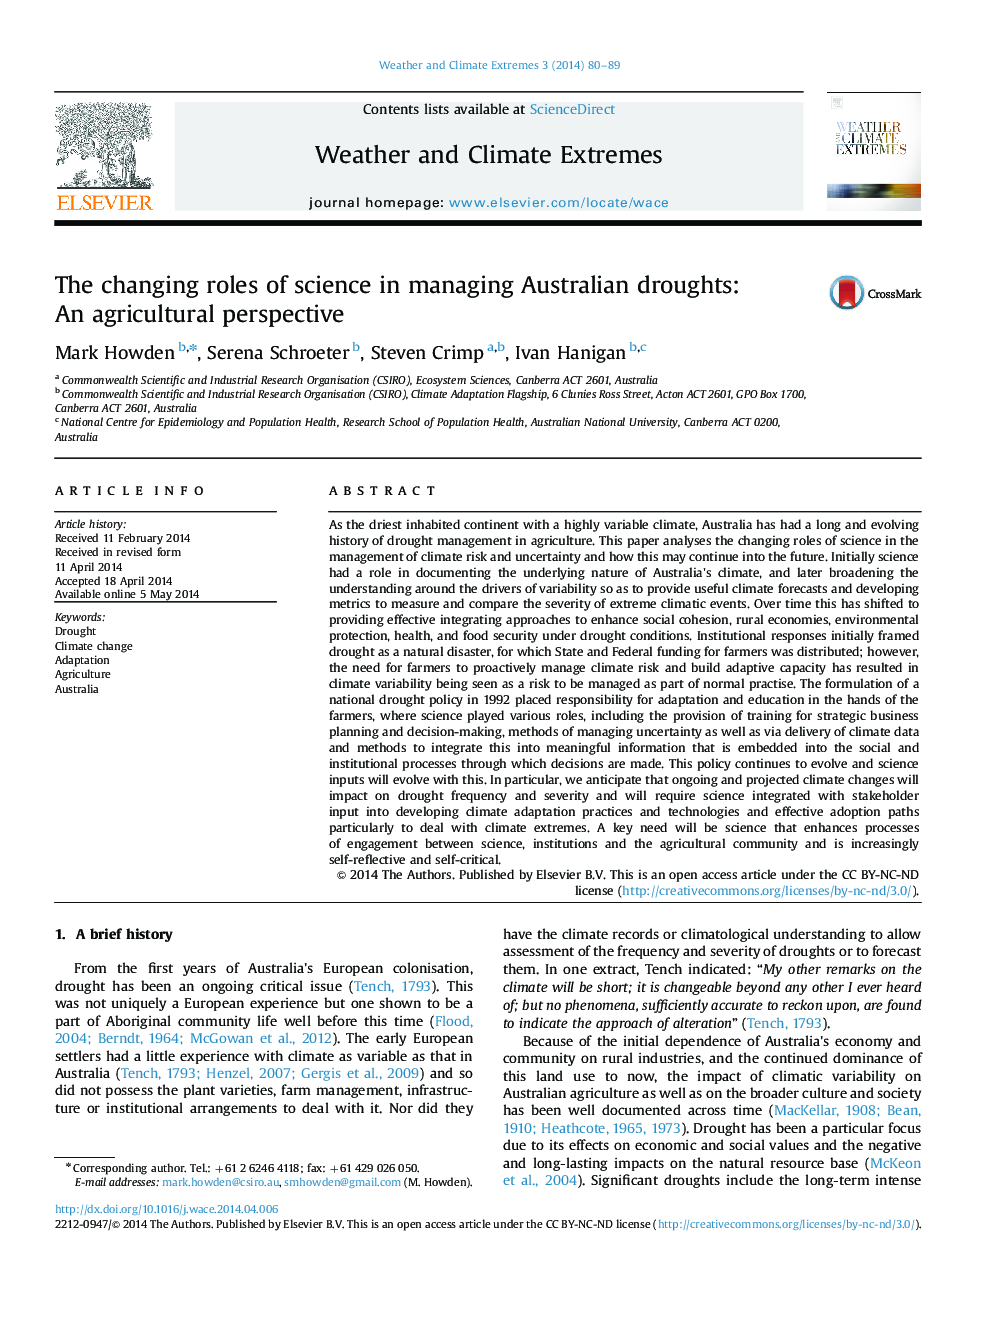 The changing roles of science in managing Australian droughts: An agricultural perspective